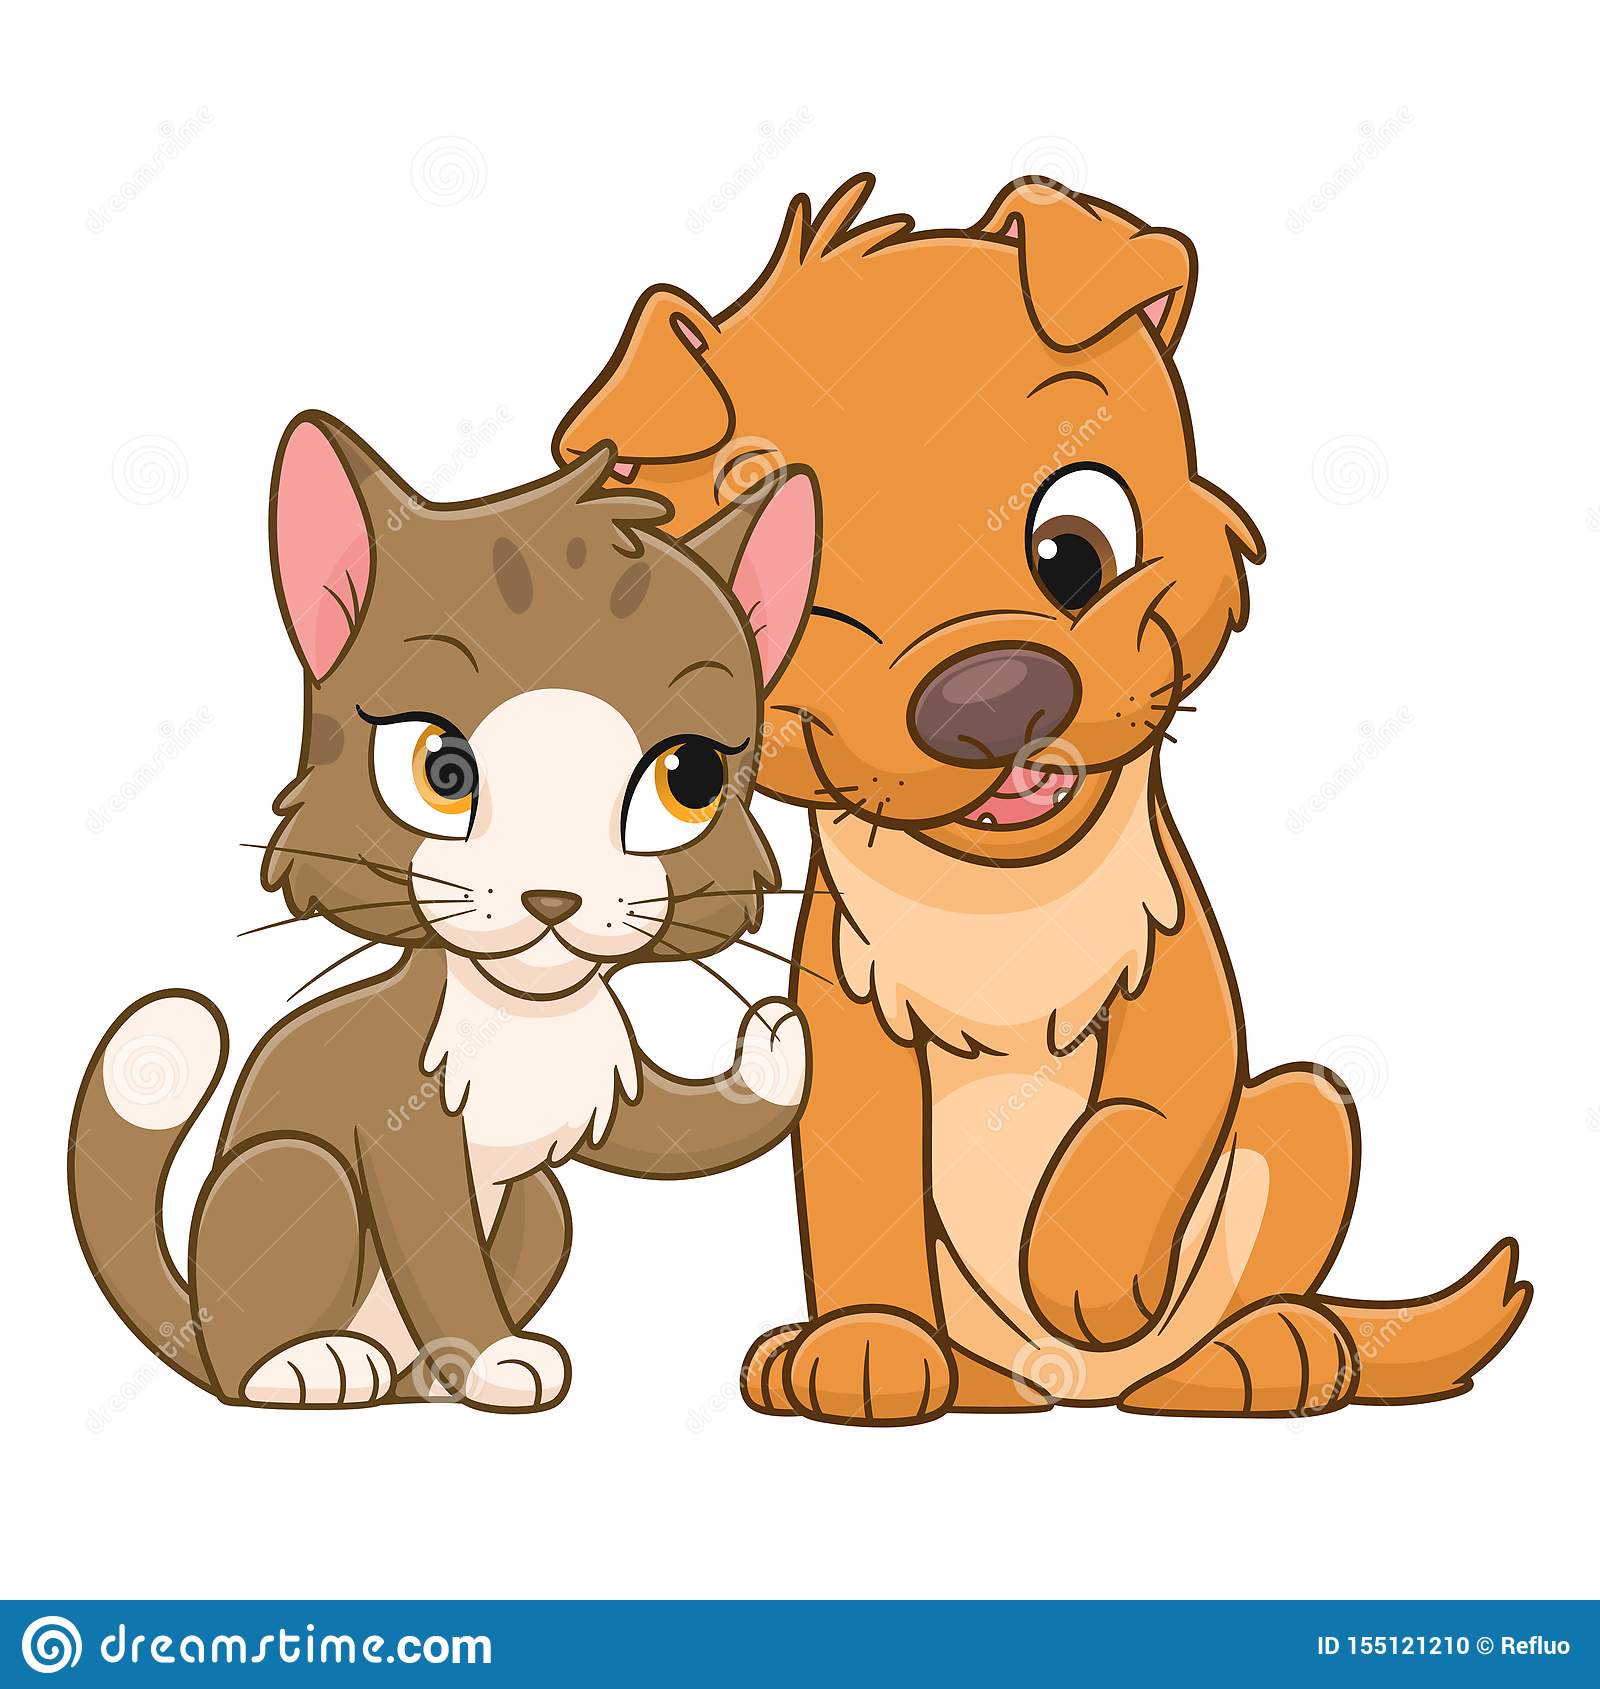 Cartoon cute cat and dog stock vector. Illustration of